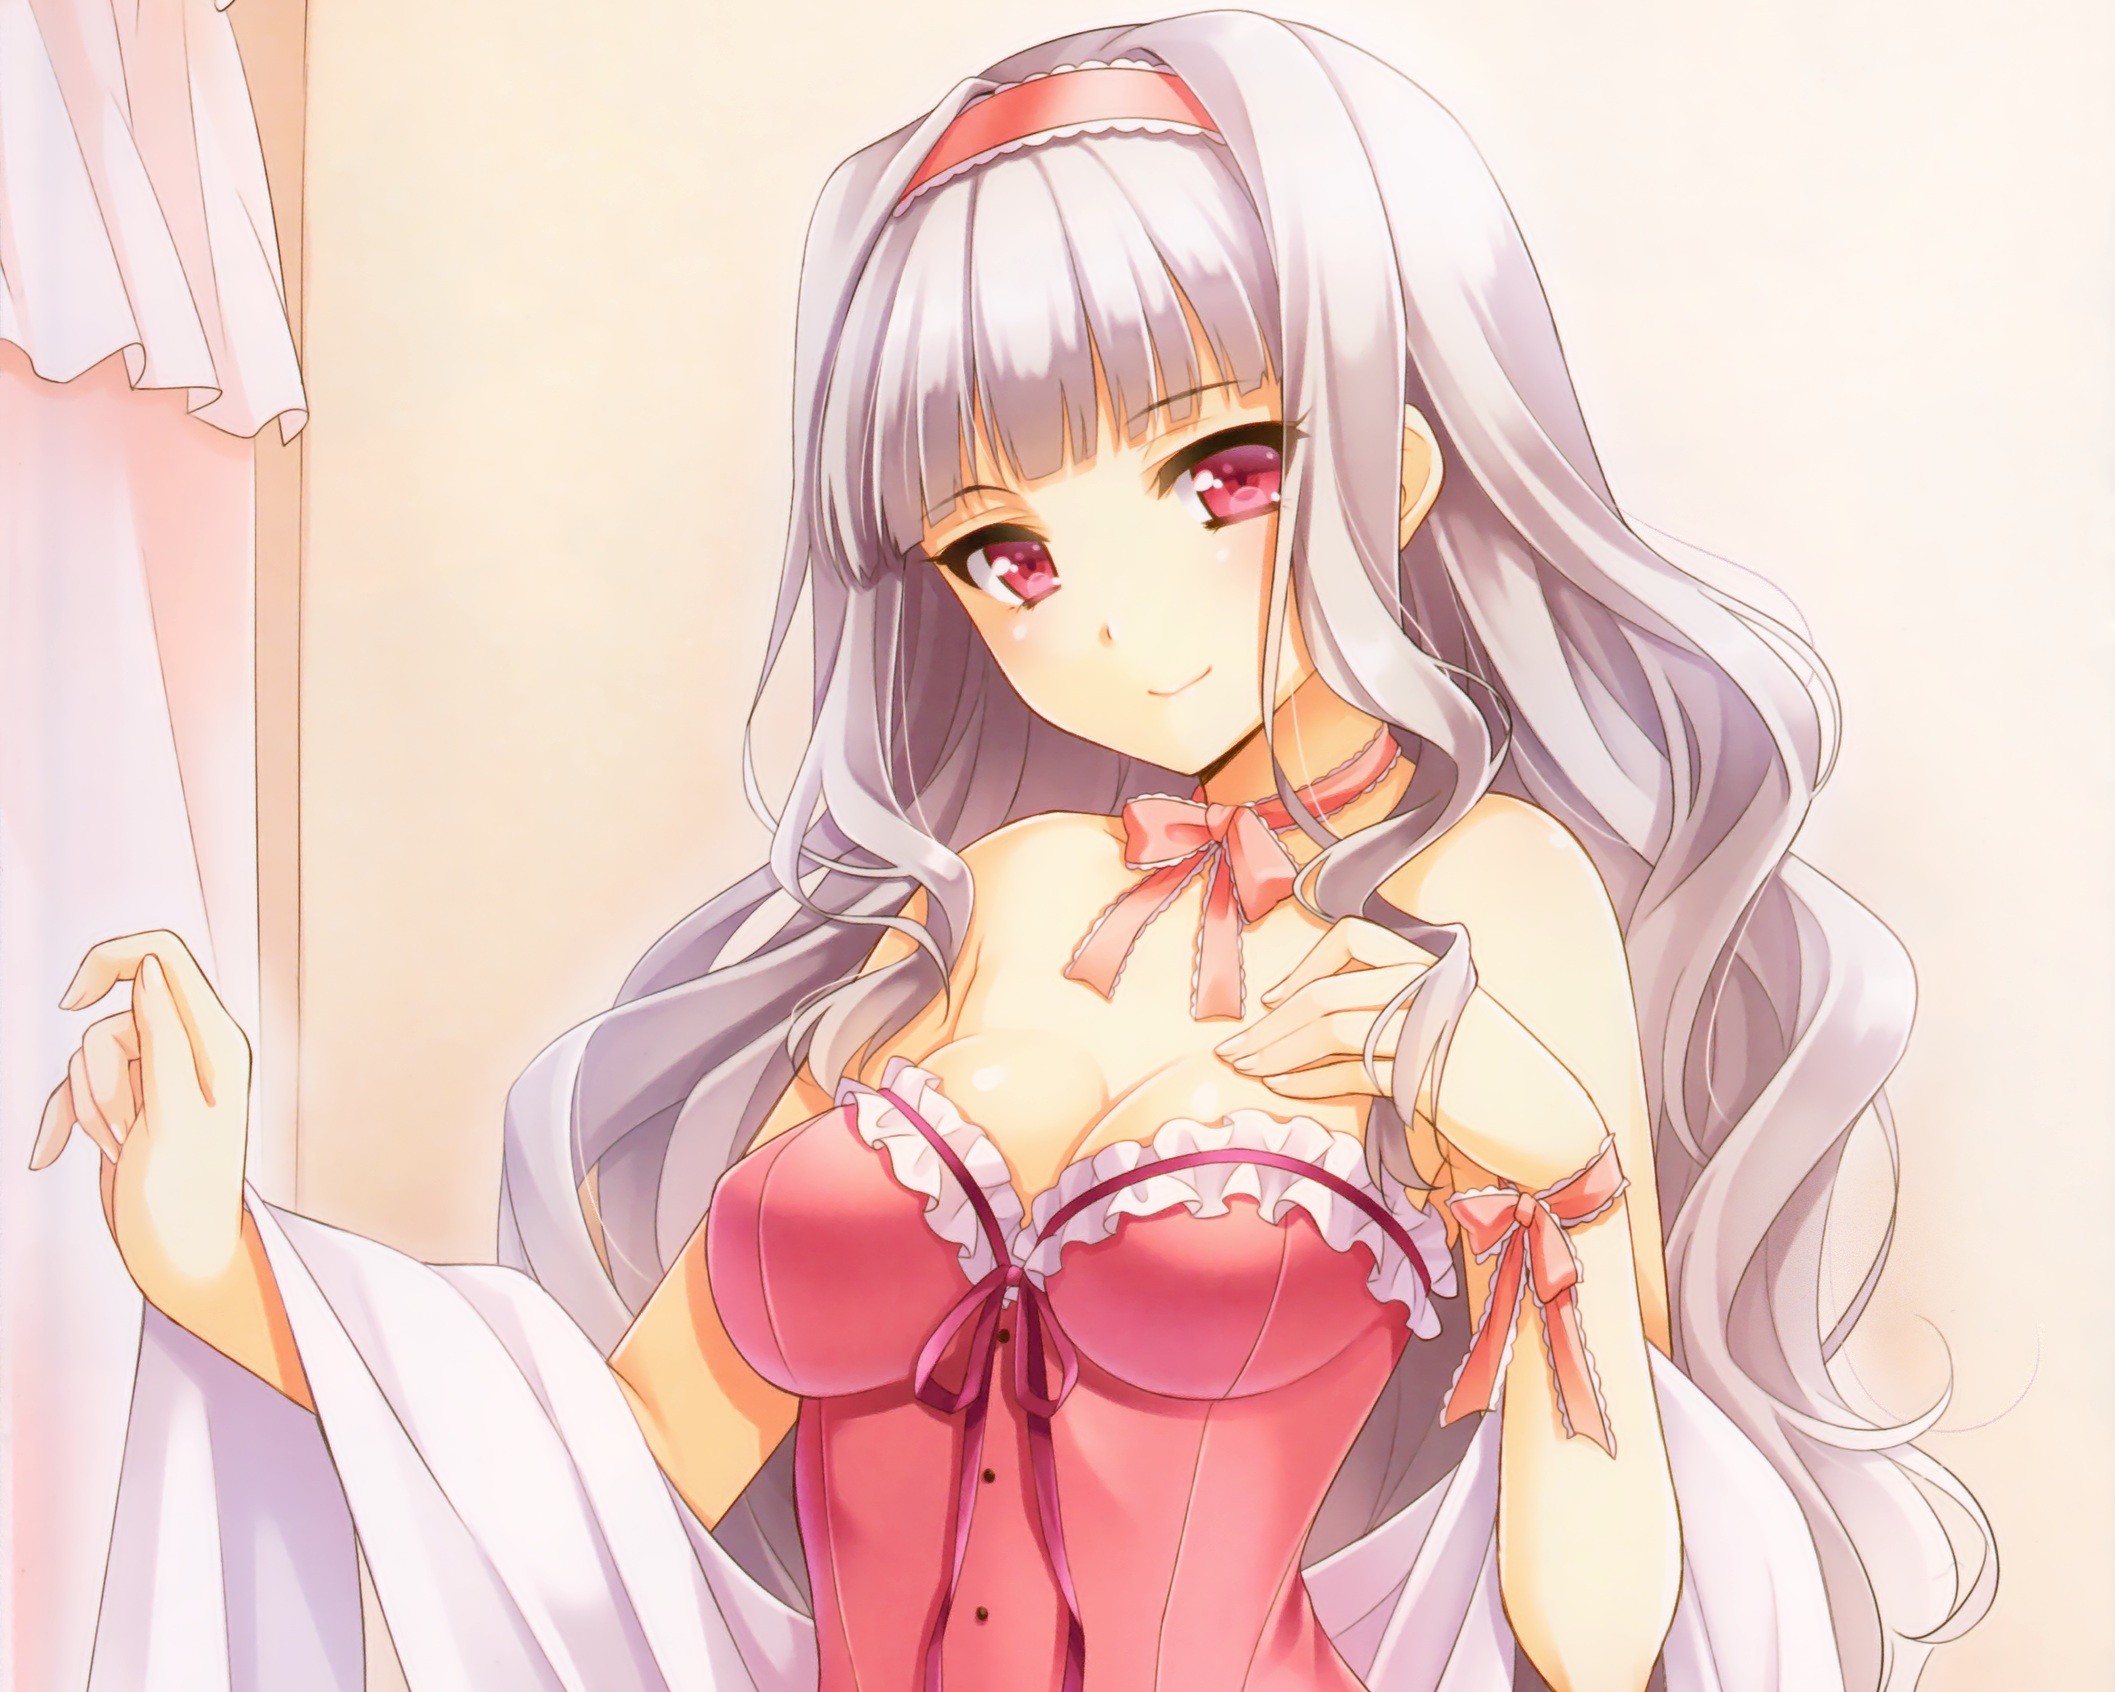 Anime 2115x1692 anime anime girls THE iDOLM@STER Shijou Takane silver hair red eyes lingerie cleavage K-ko Courreges Ace smiling women pink eyes long hair red lingerie looking at viewer